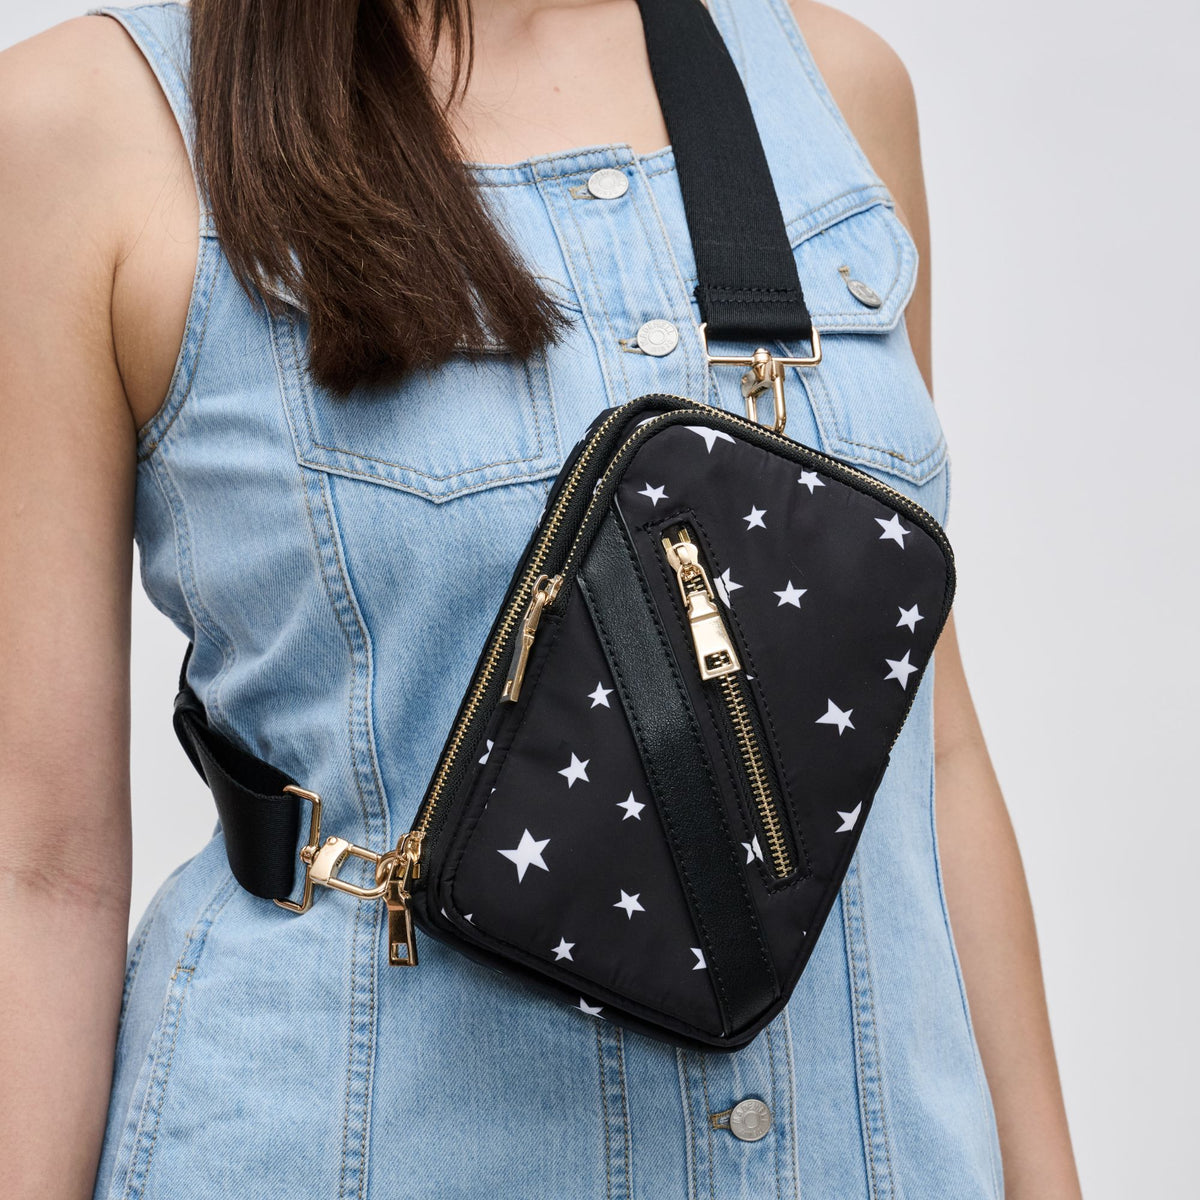 Woman wearing Black Star Sol and Selene Accolade Sling Backpack 841764107273 View 1 | Black Star